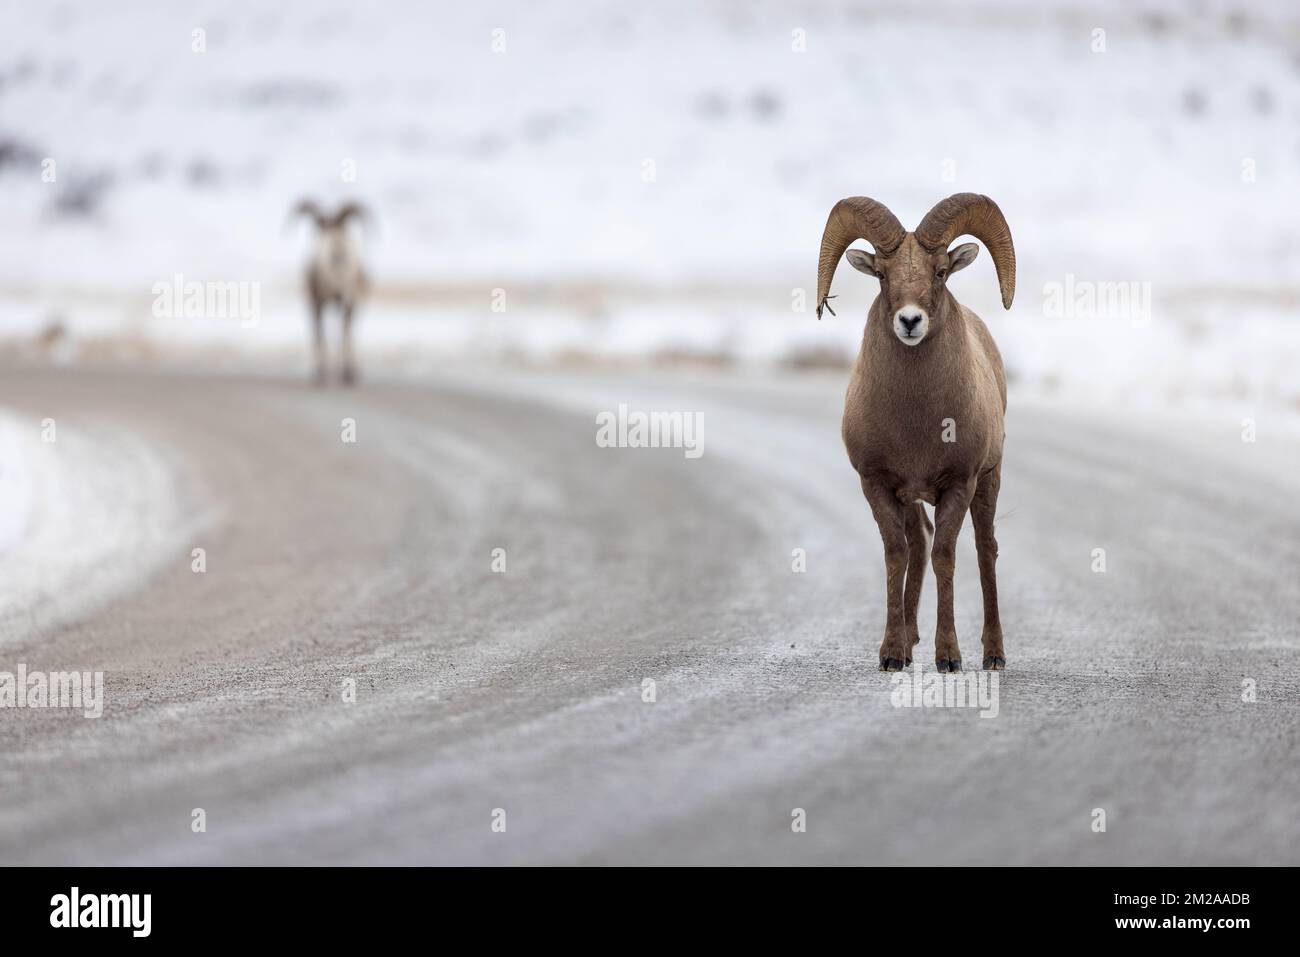 Two bighorn sheep rams walking in opposite directions on an icy dirt road. National Elk Refuge, Wyoming Stock Photo